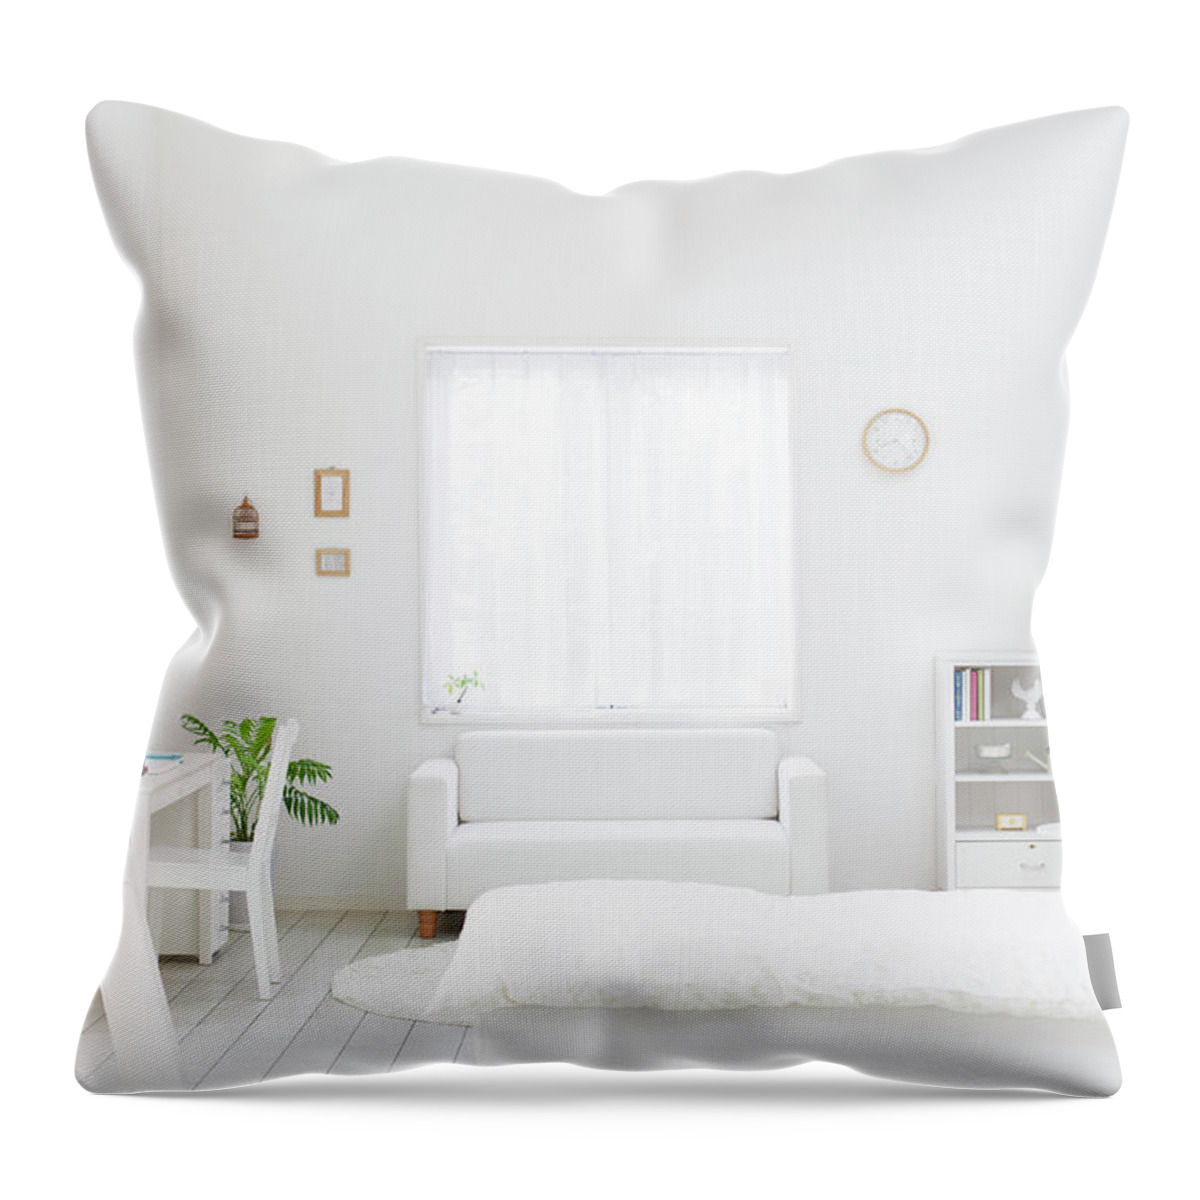 Domestic Room Throw Pillow featuring the photograph White Bedroom by Bloom Image